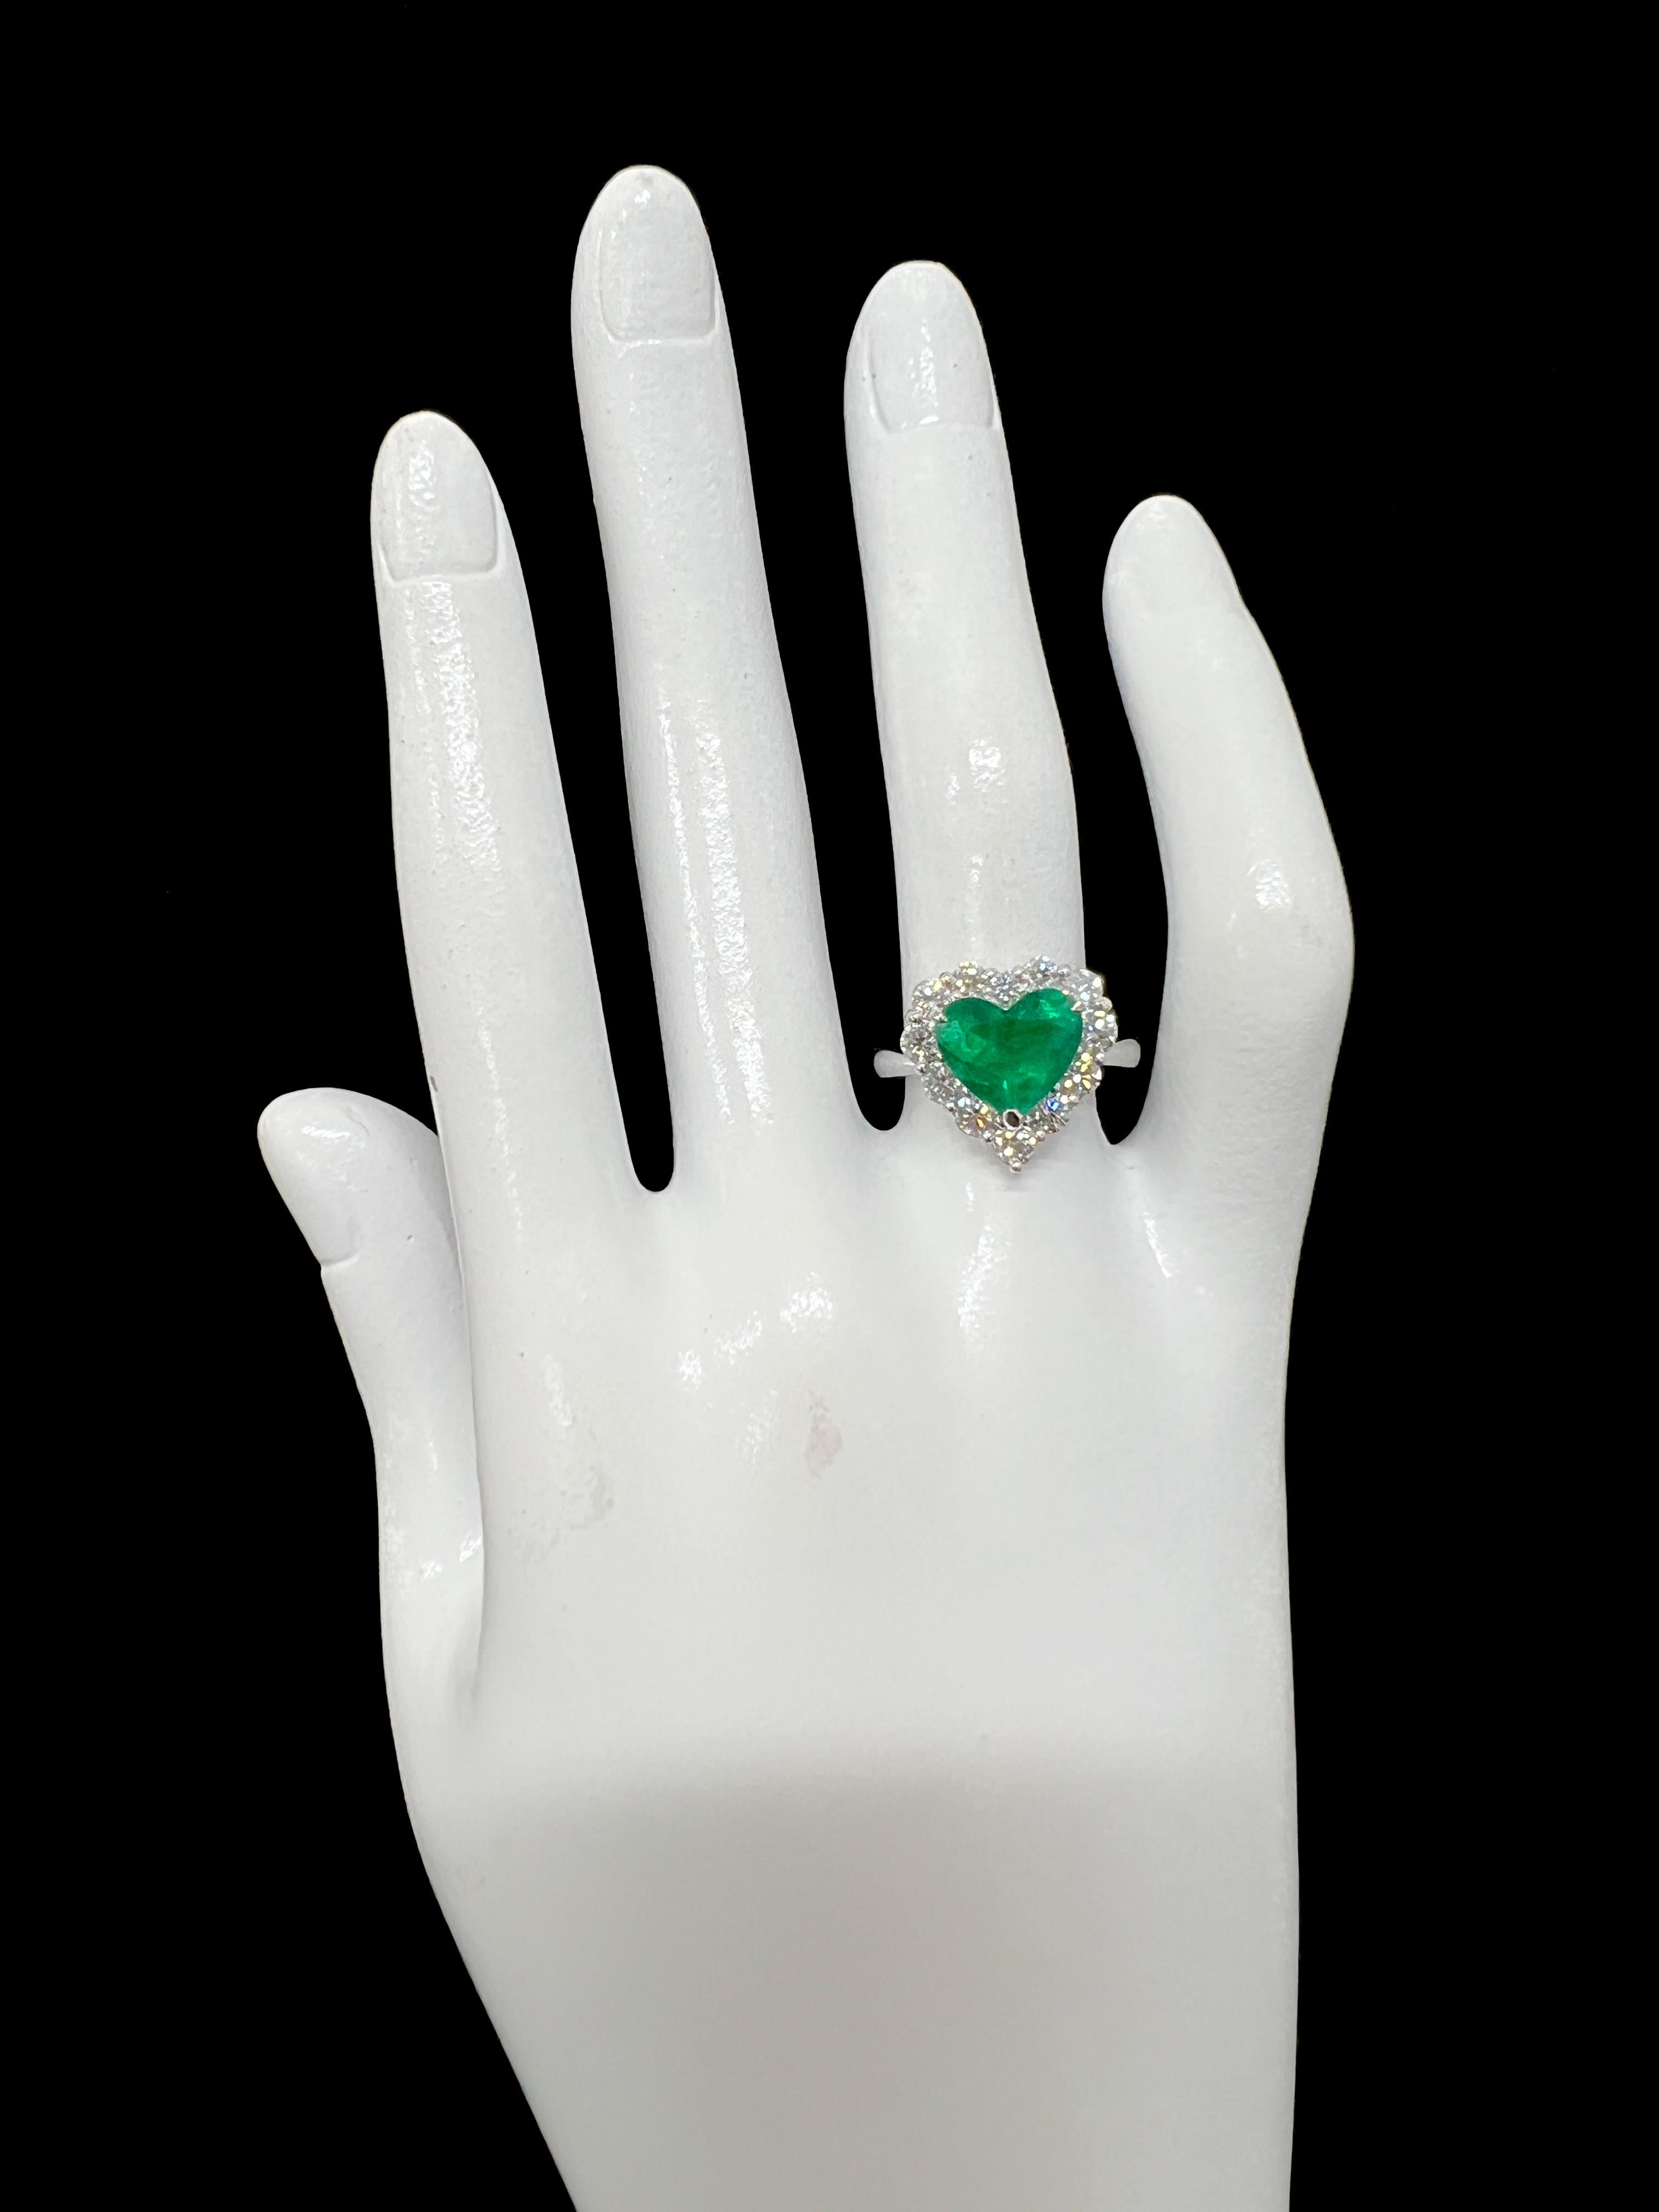 GIA Certified 2.25 Carat Heart Shape Colombian Emerald Ring Set in Platinum For Sale 1